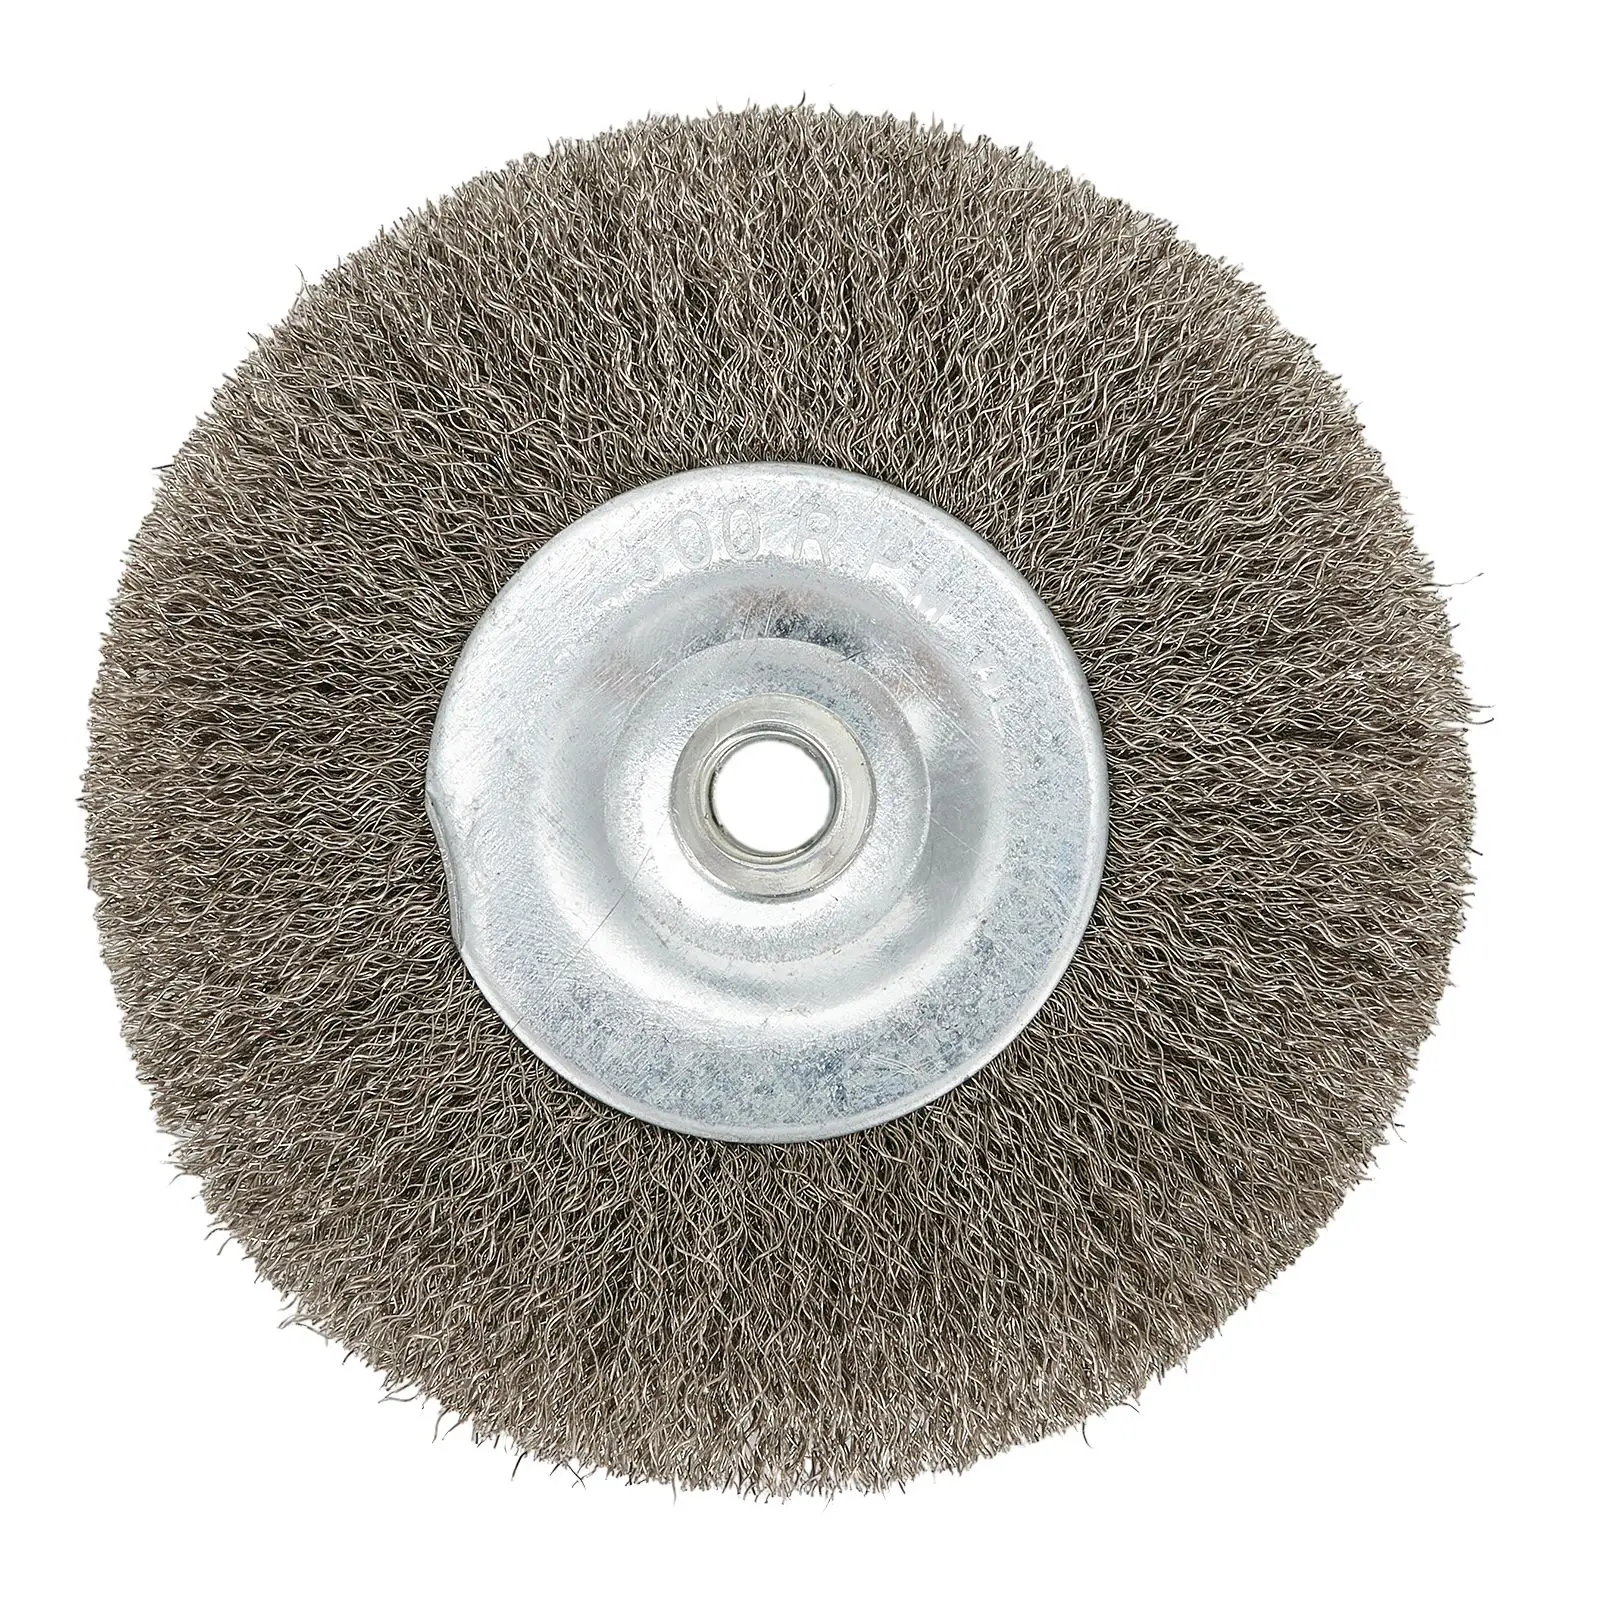 Get Your Surface Ready with 3In Flat Crimped Wire Wheel Brush Made from Stainless Steel Perfect for Angle Grinder meike diamond pen grinding wheel dresser cylindrical grinder large particle square head flat head wear resistant dressing block